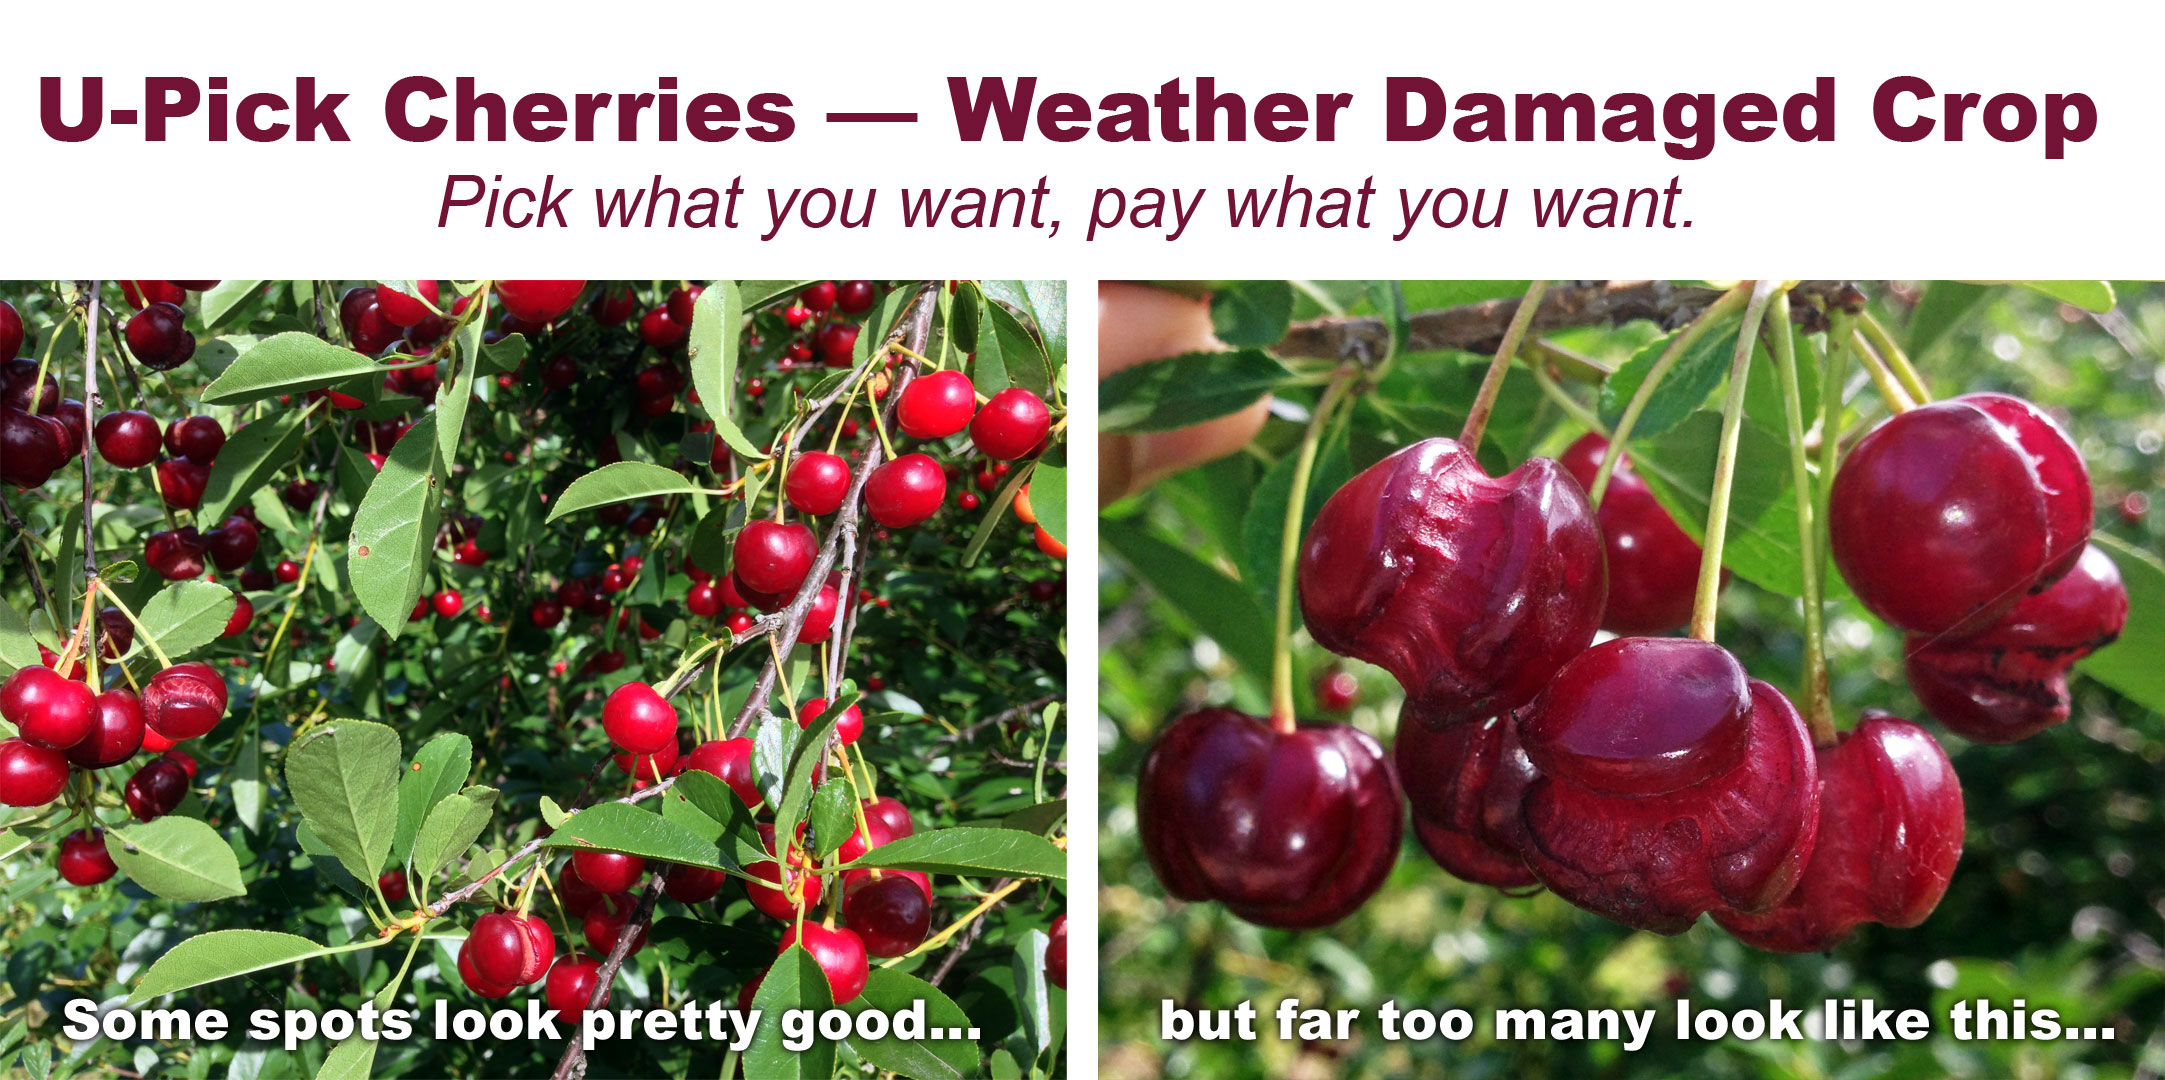 U-Pick Cherries — Weather Damaged Crop // Pick what you want, pay what you want.